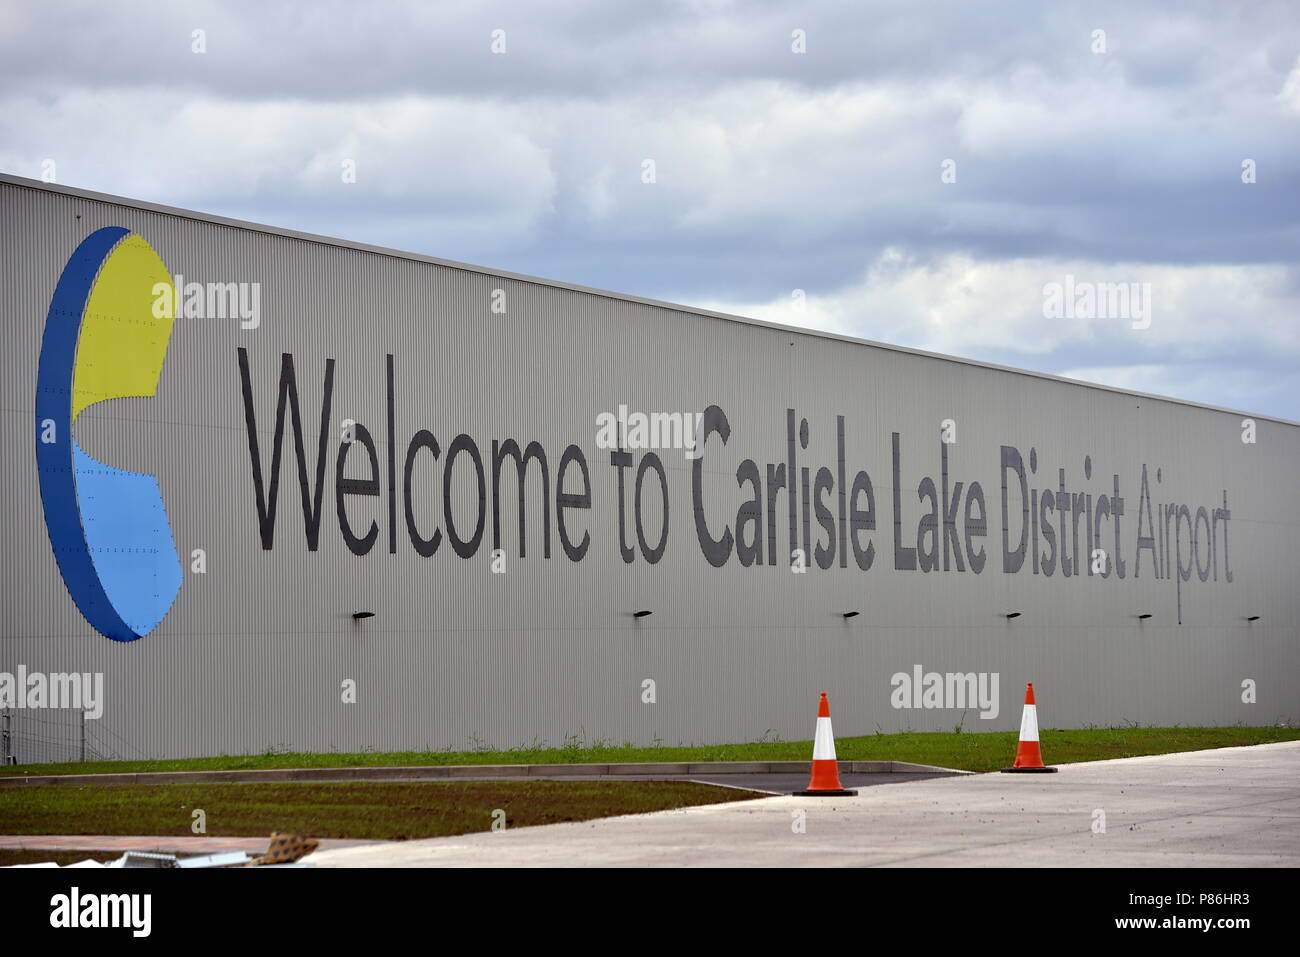 Carlisle, UK. 9th July 2018. Welcome to Carlisle Lake District Airport sign on the distribution centre wall: 9 July 2018 STUART WALKER Credit: STUART WALKER/Alamy Live News Stock Photo